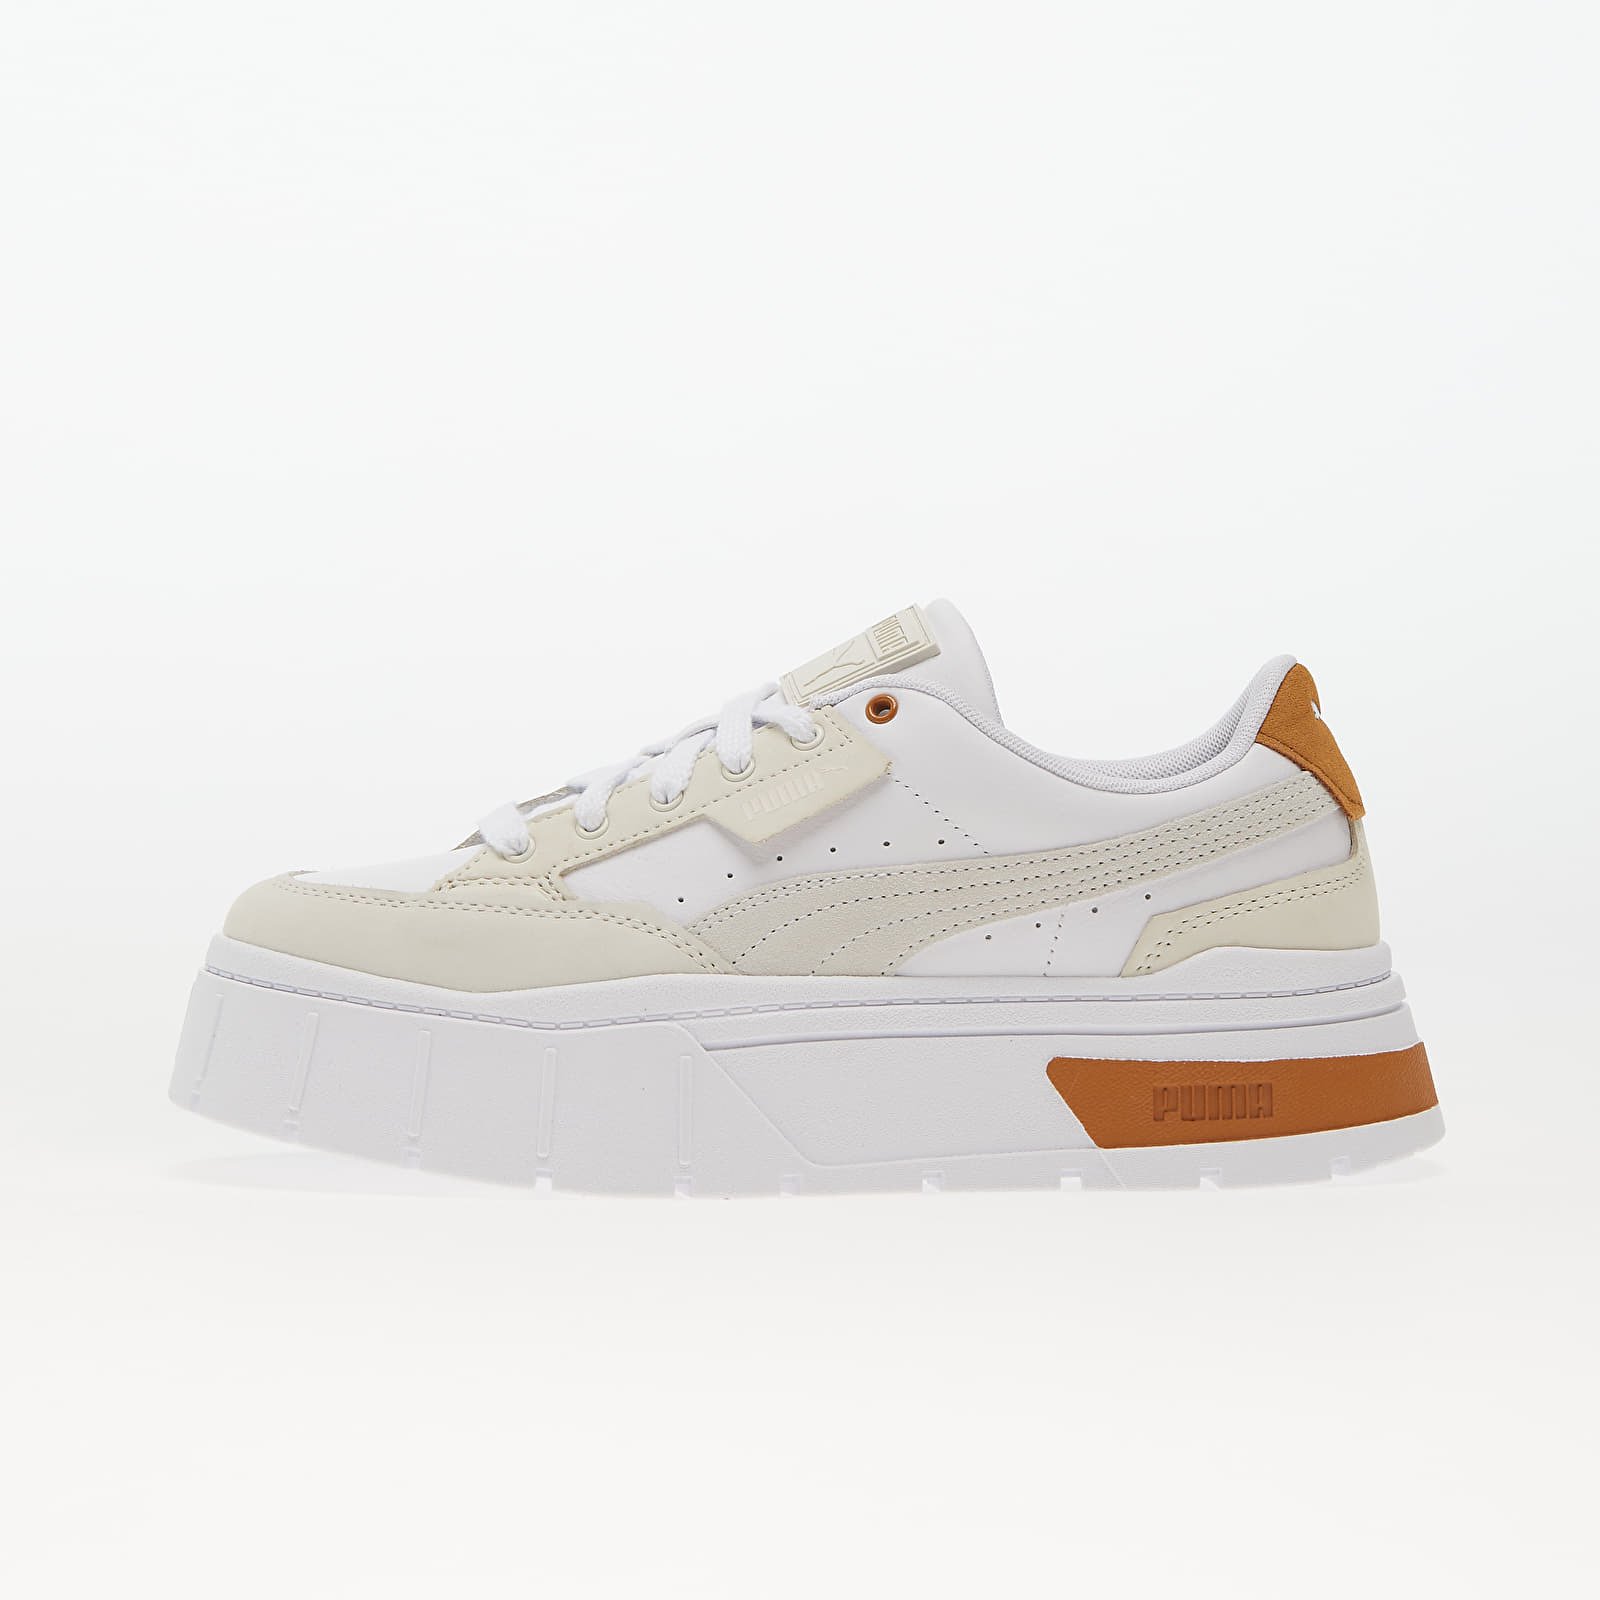 Puma Mayze Stack Luxe Wns Puma White-Frosted Ivory